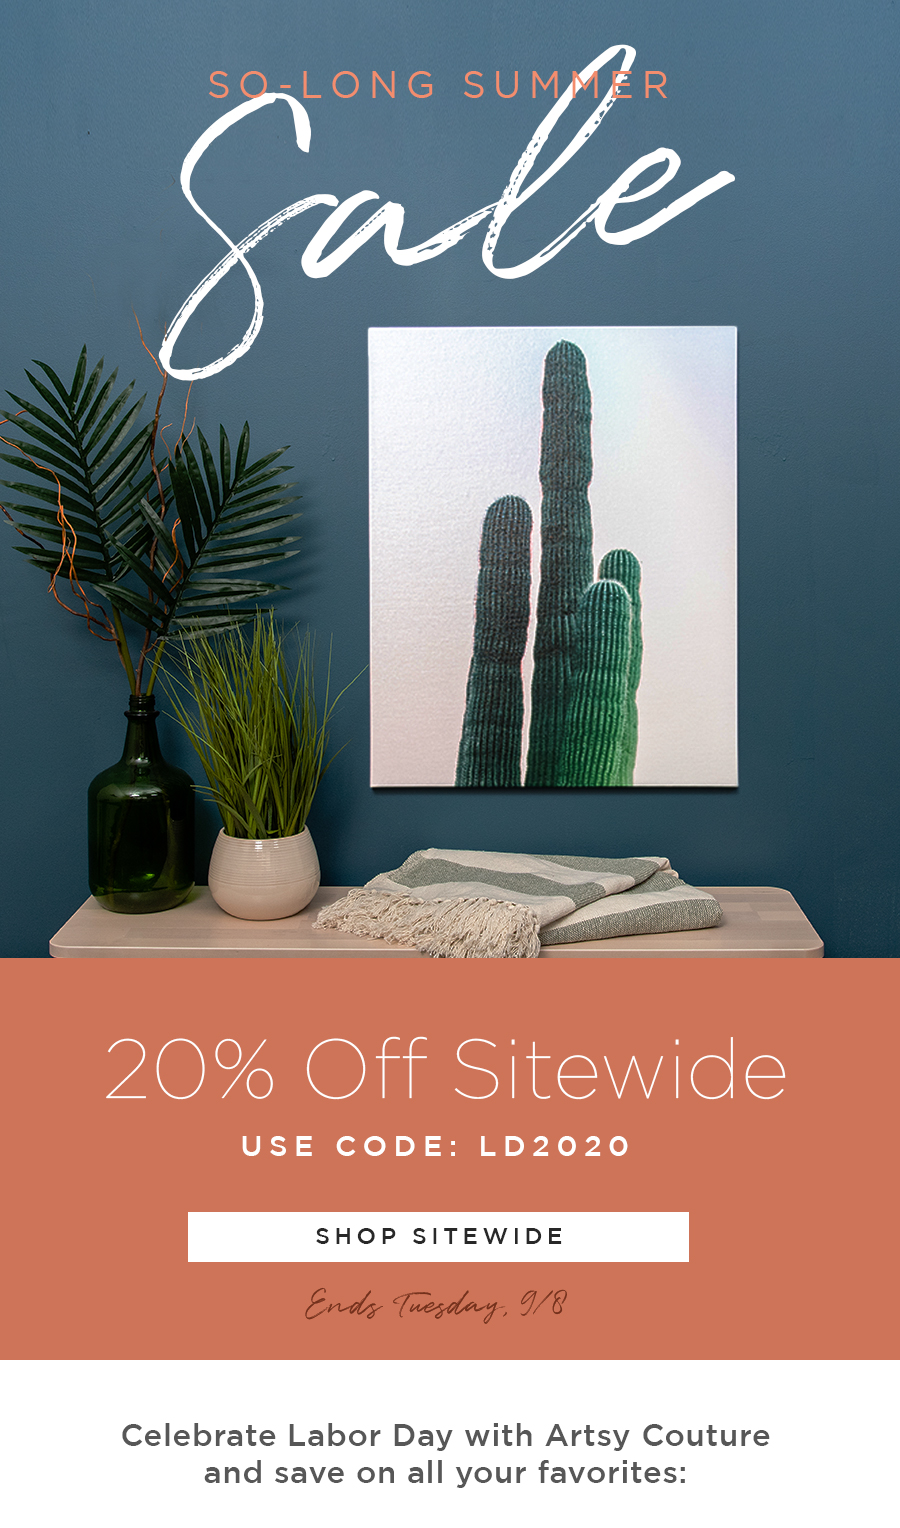 So Long Summer Sale  Enjoy 20% Off Sitewide  Use Code: LD2020  Ends Tuesday, 9/8